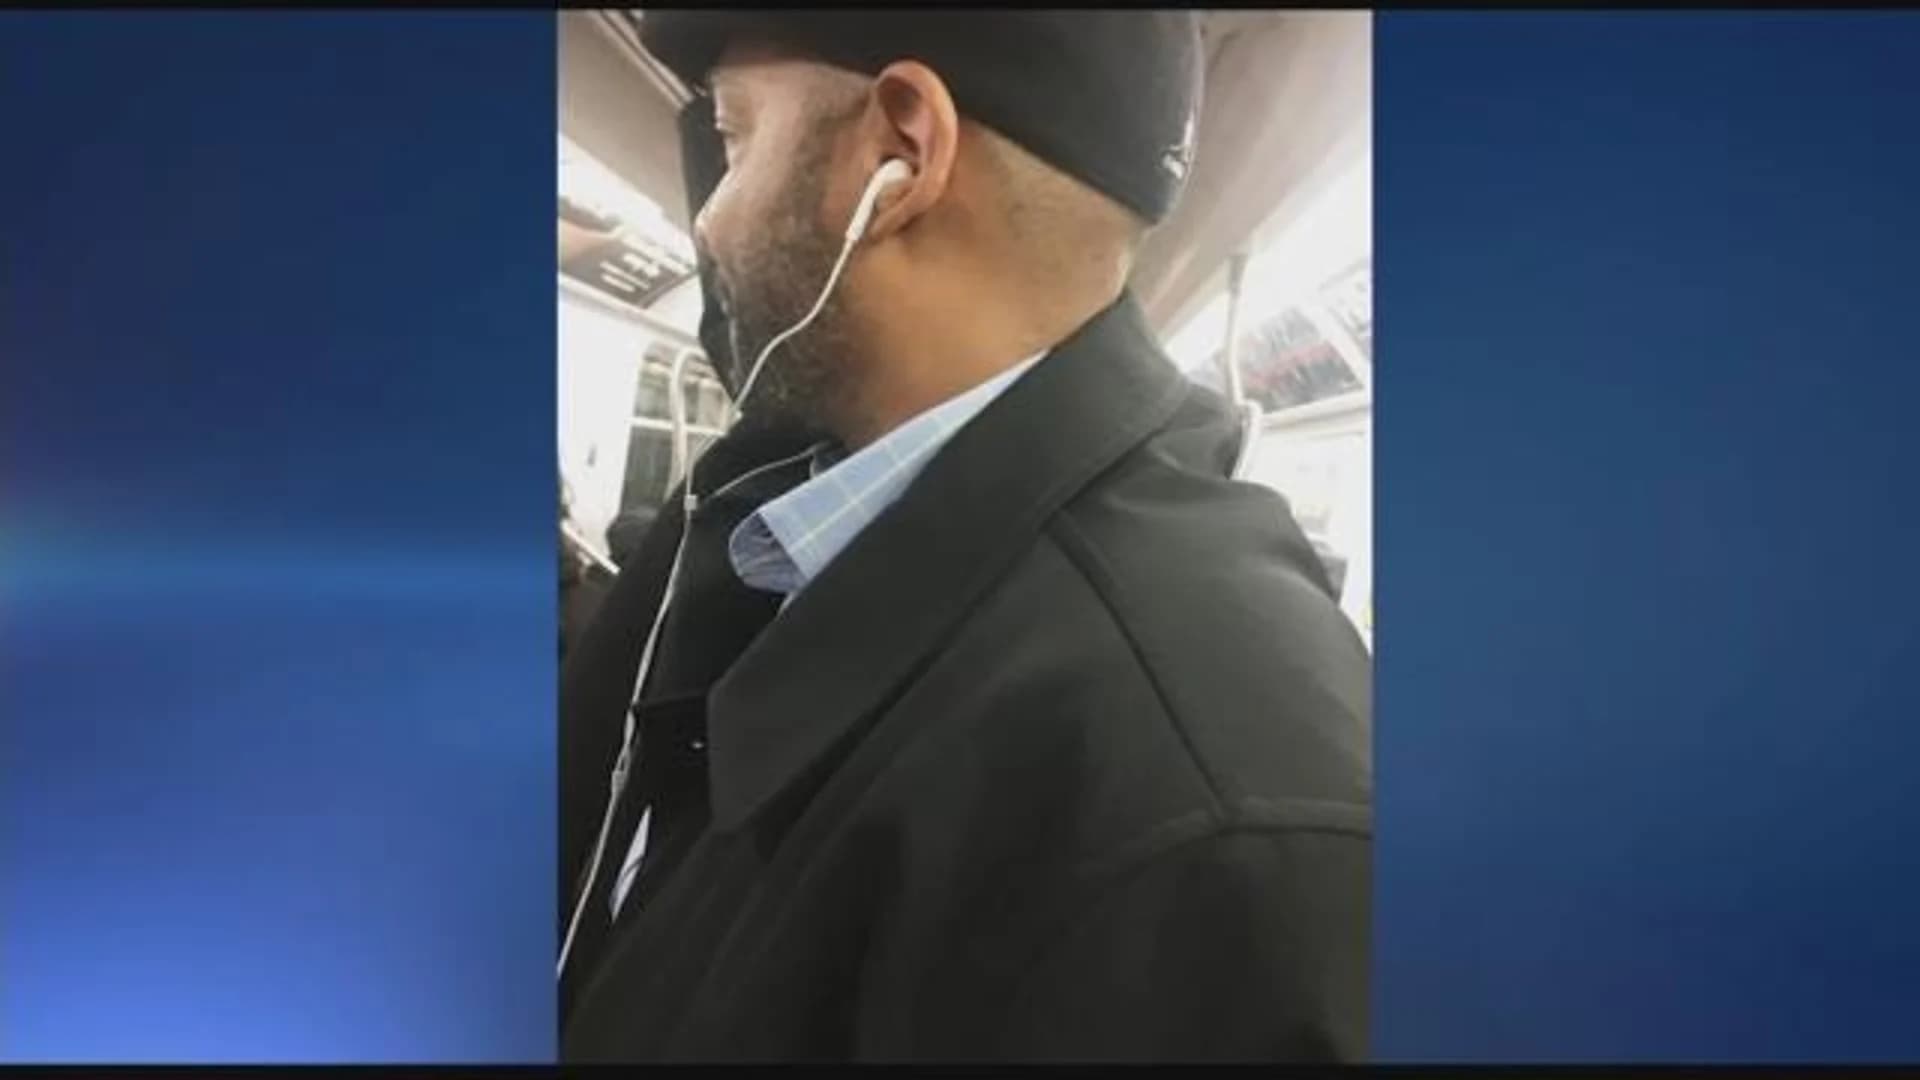 Police: Man allegedly groped woman on 2 train